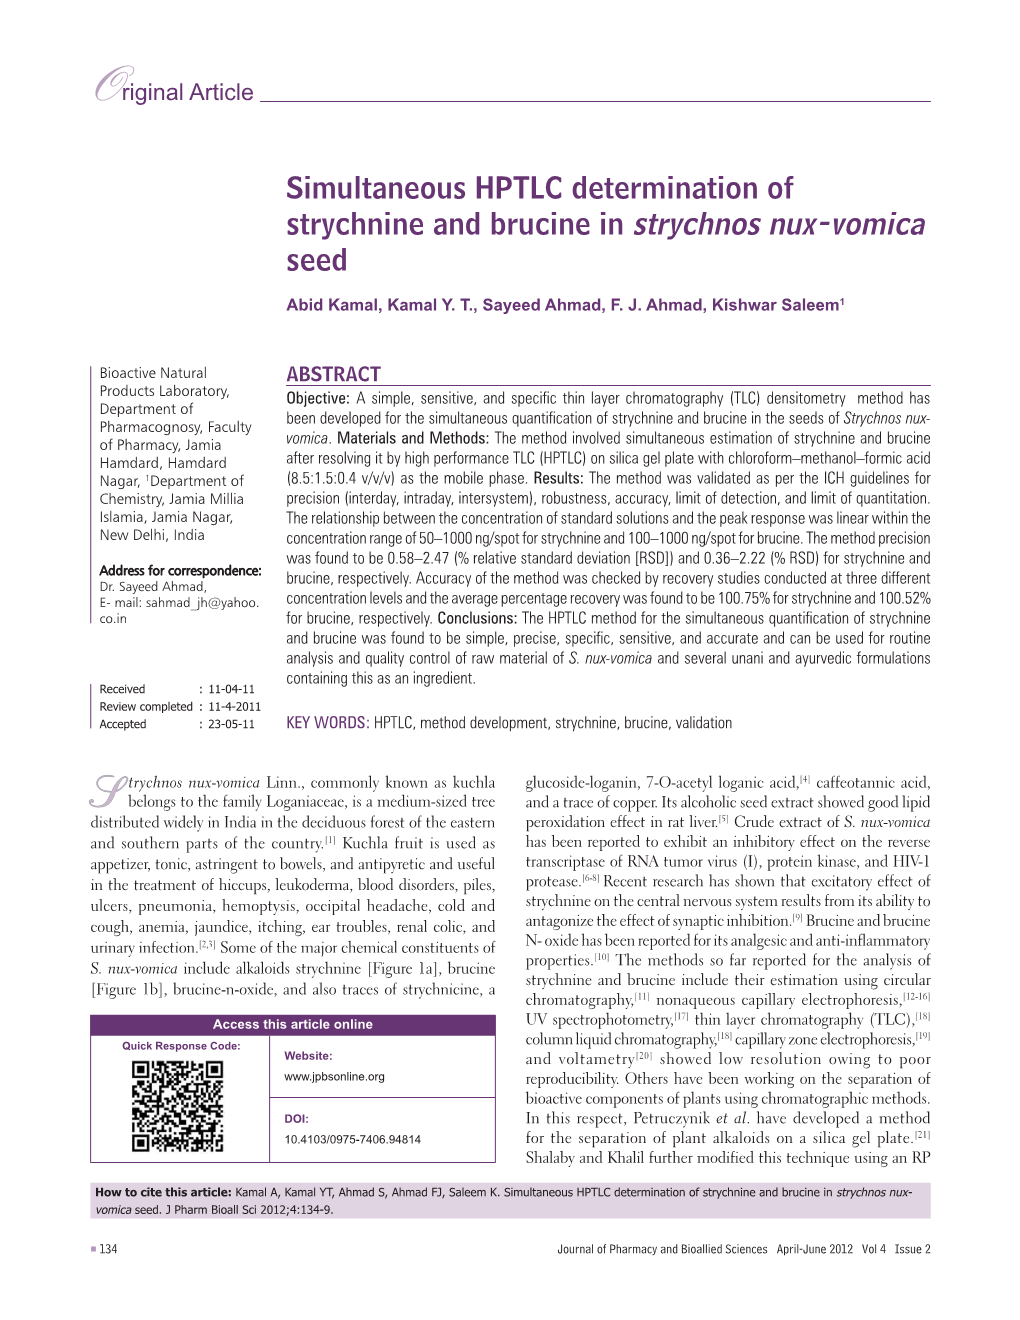 Simultaneous HPTLC Determination of Strychnine and Brucine in Strychnos Nux-Vomica Seed